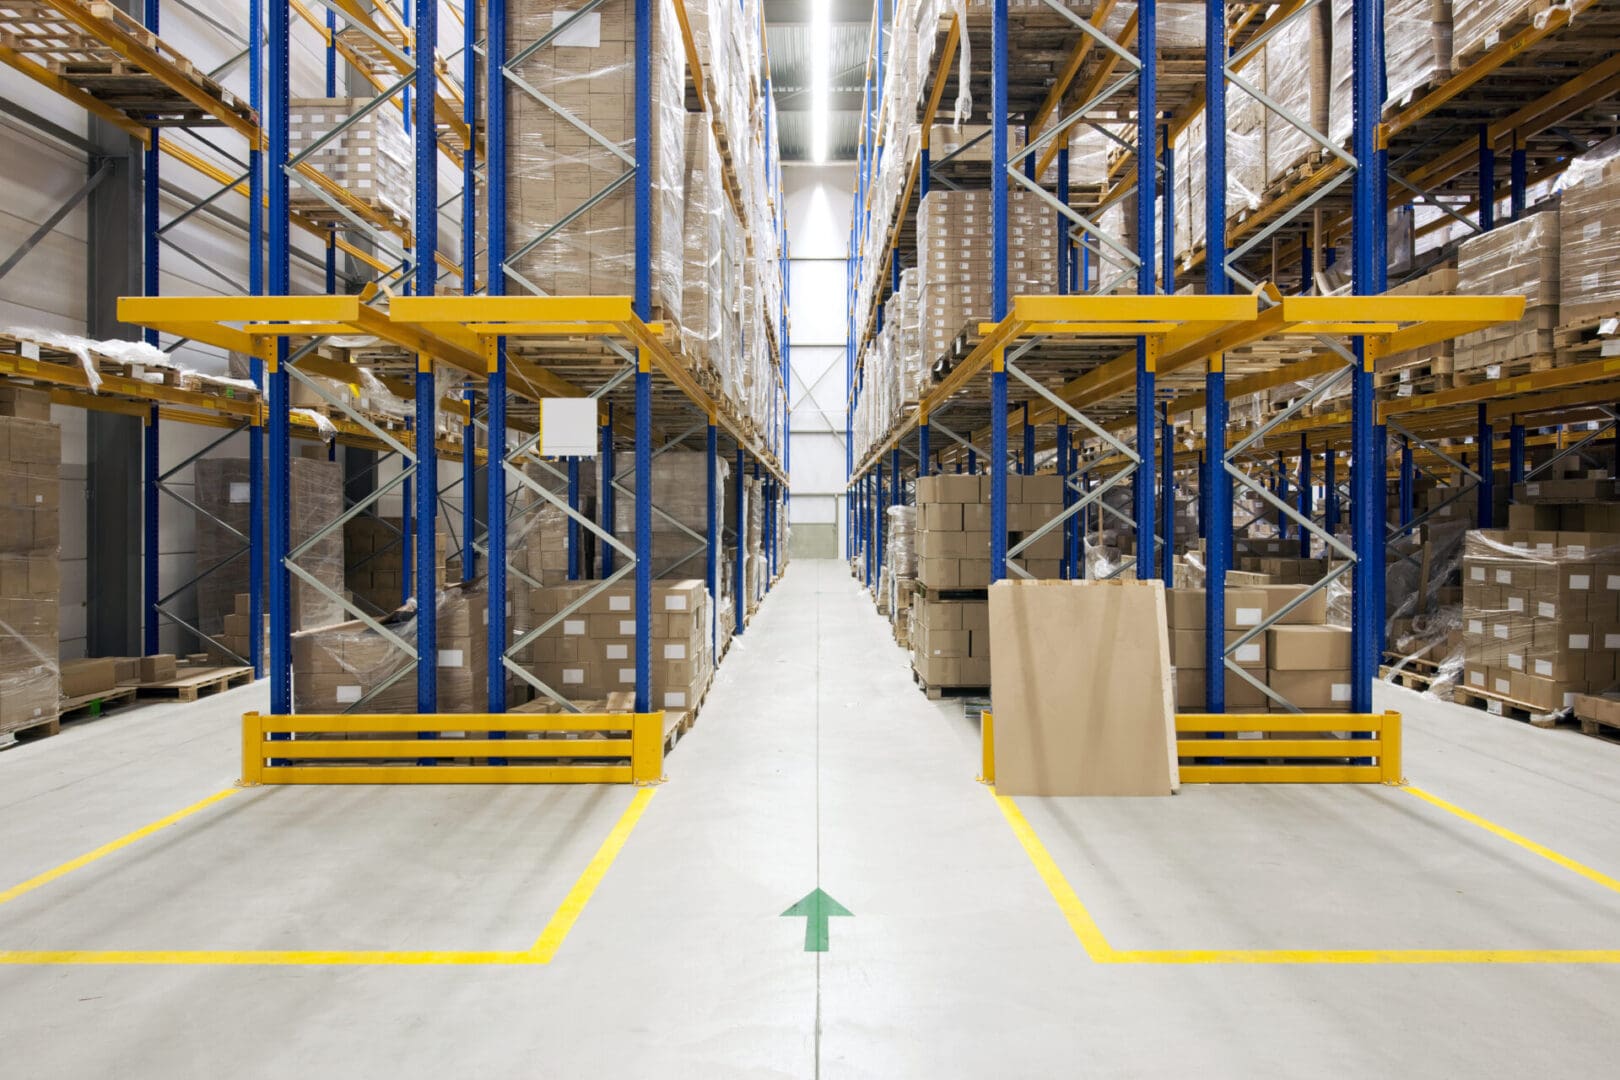 A warehouse with many racks of boxes and a green arrow.